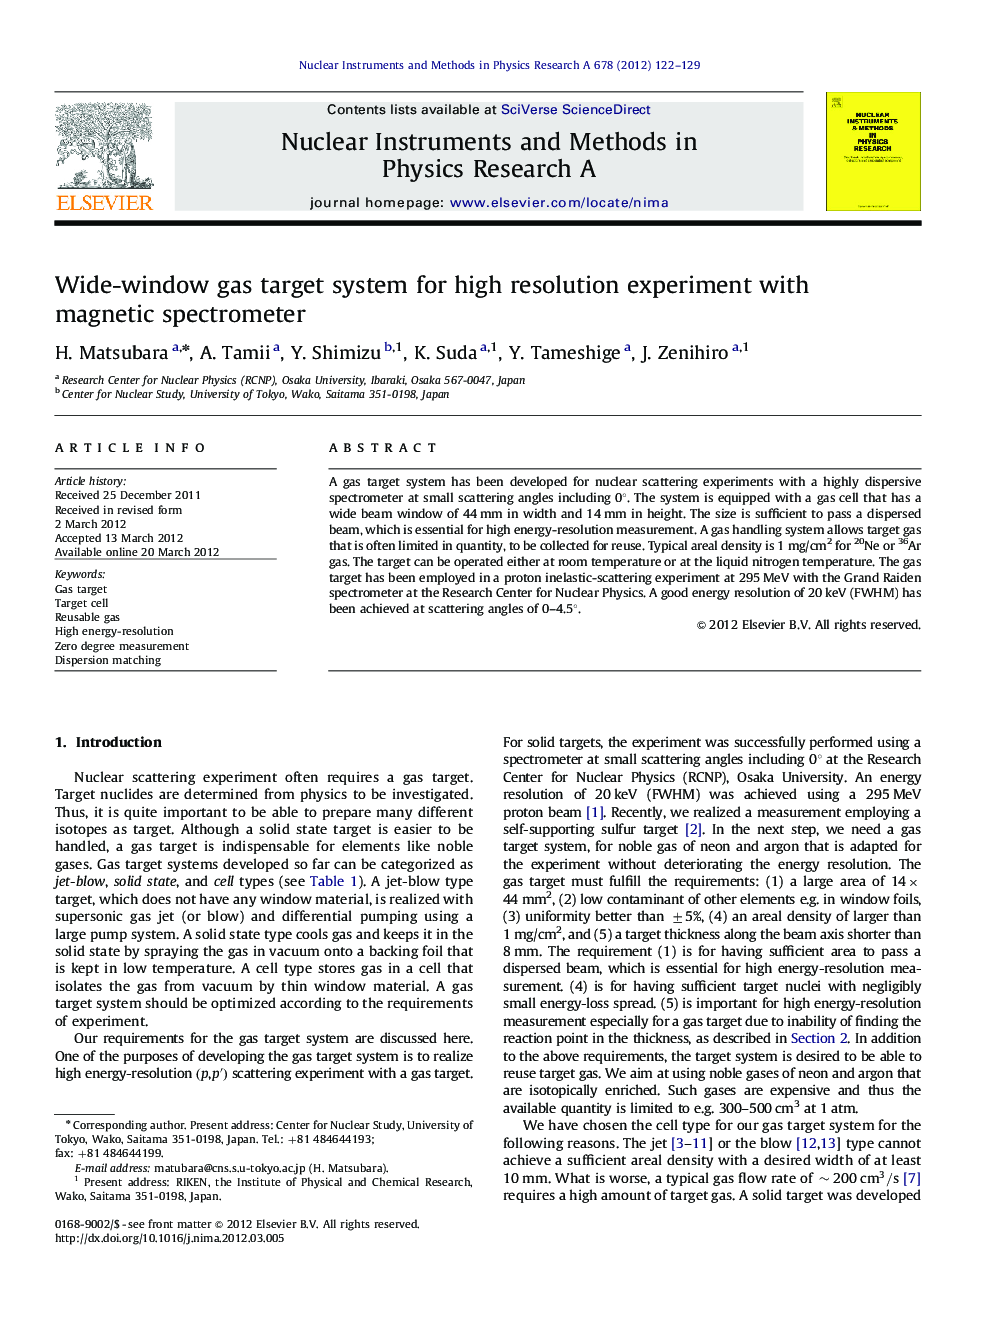 Wide-window gas target system for high resolution experiment with magnetic spectrometer